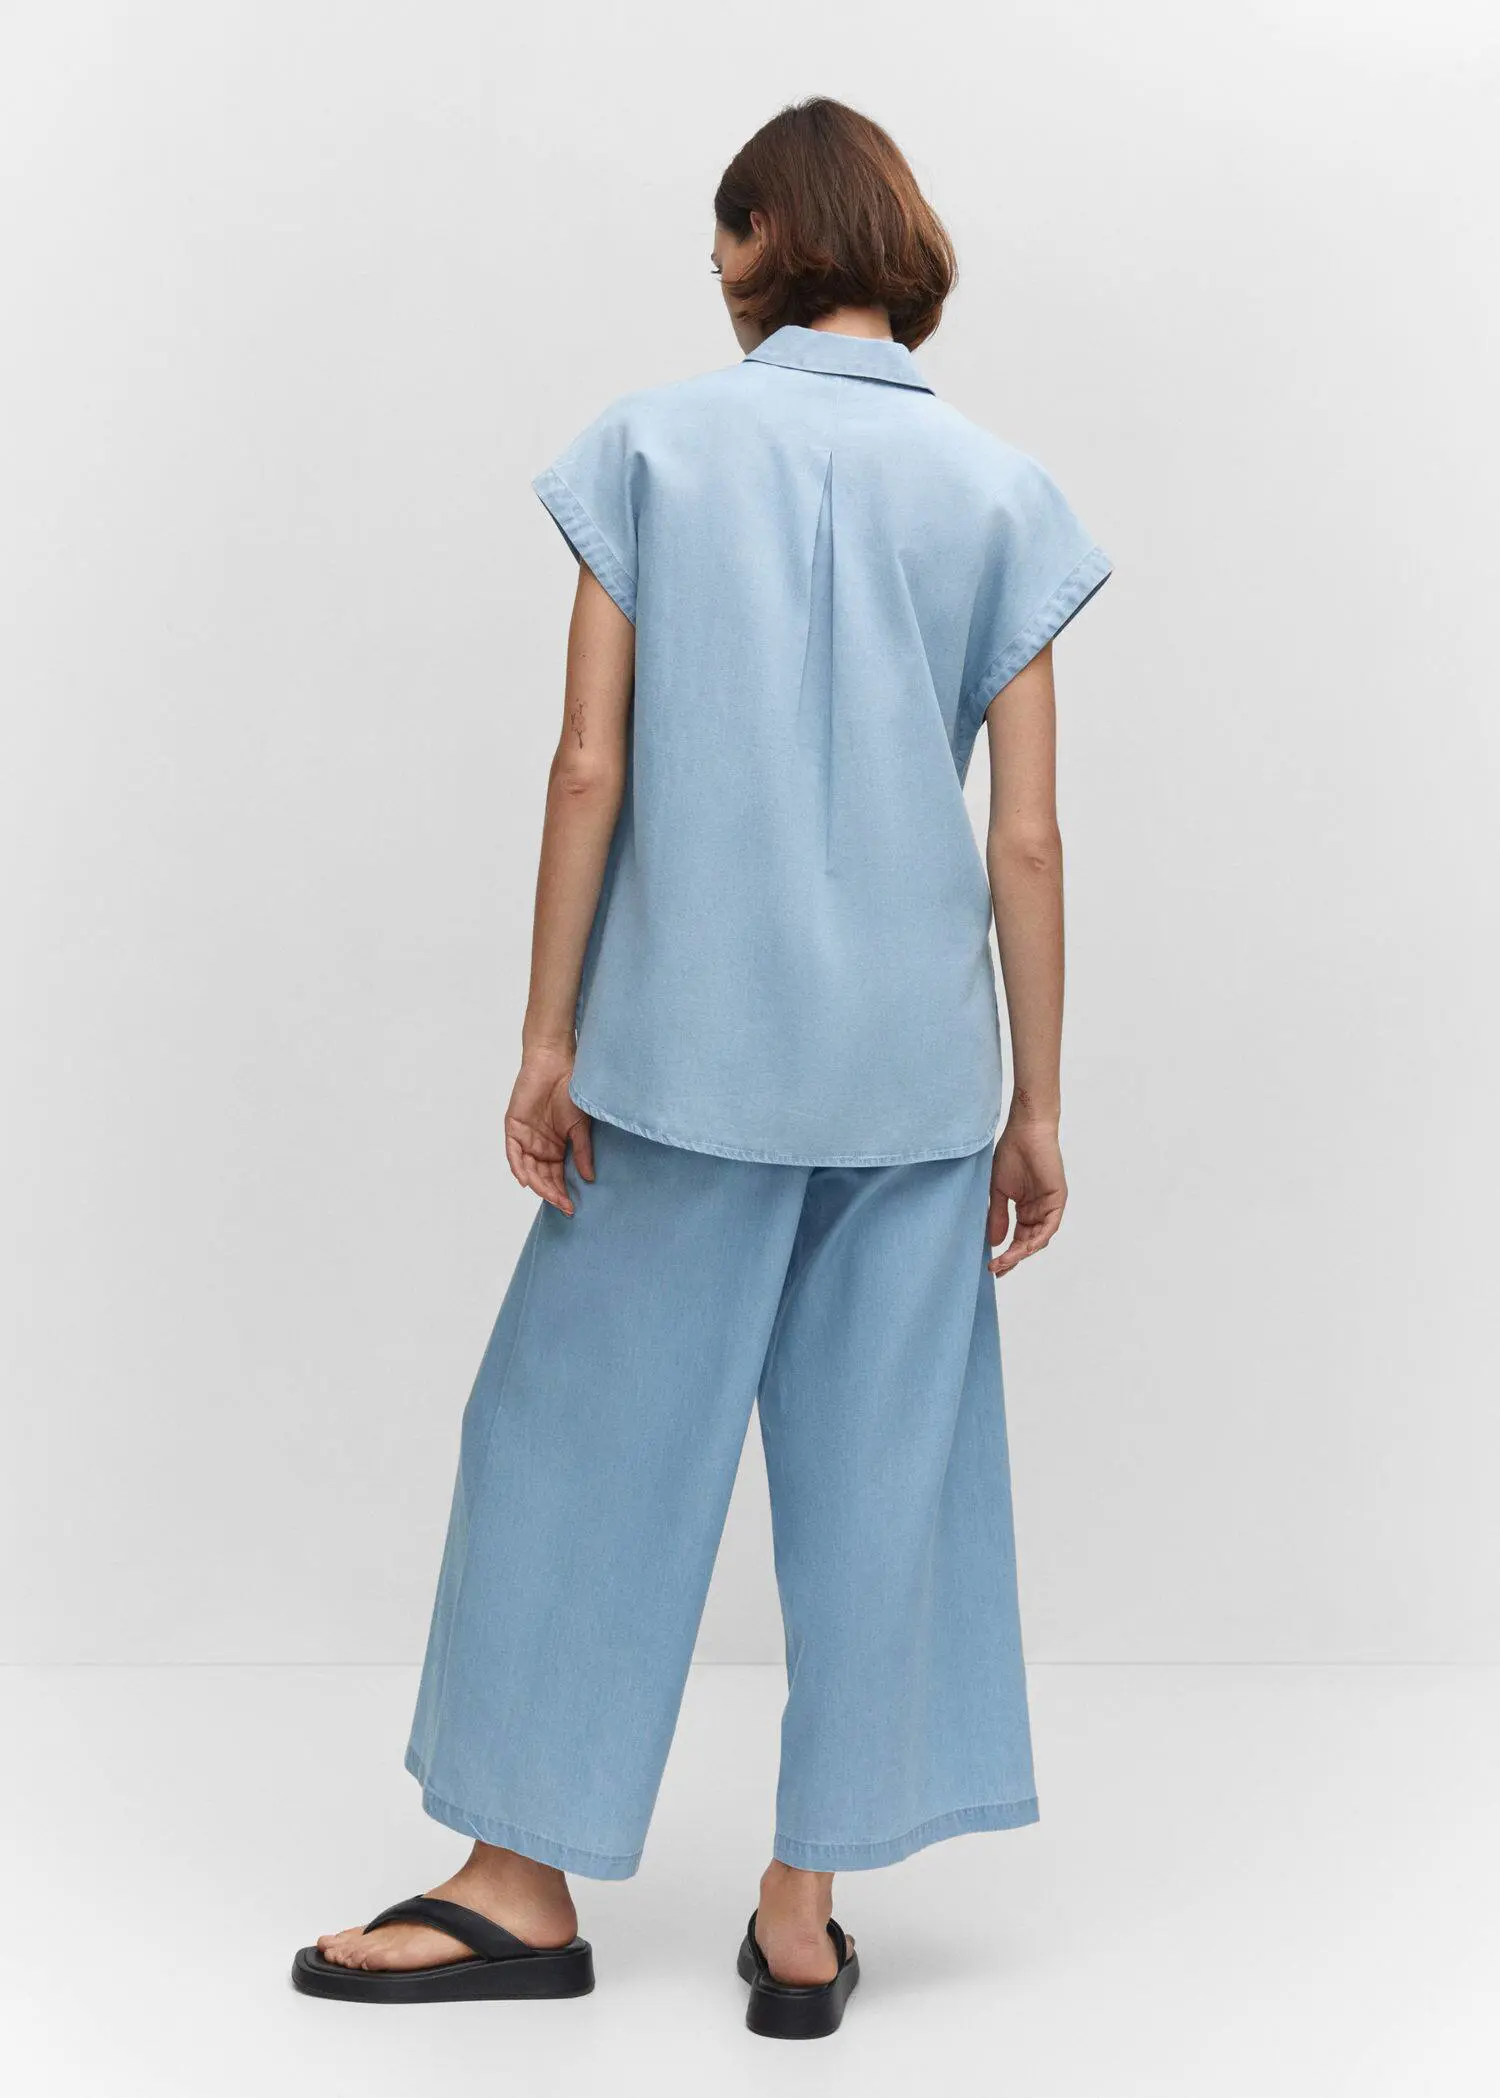 Mango Chest-pocket cotton shirt. a person standing in a room wearing a light blue outfit. 